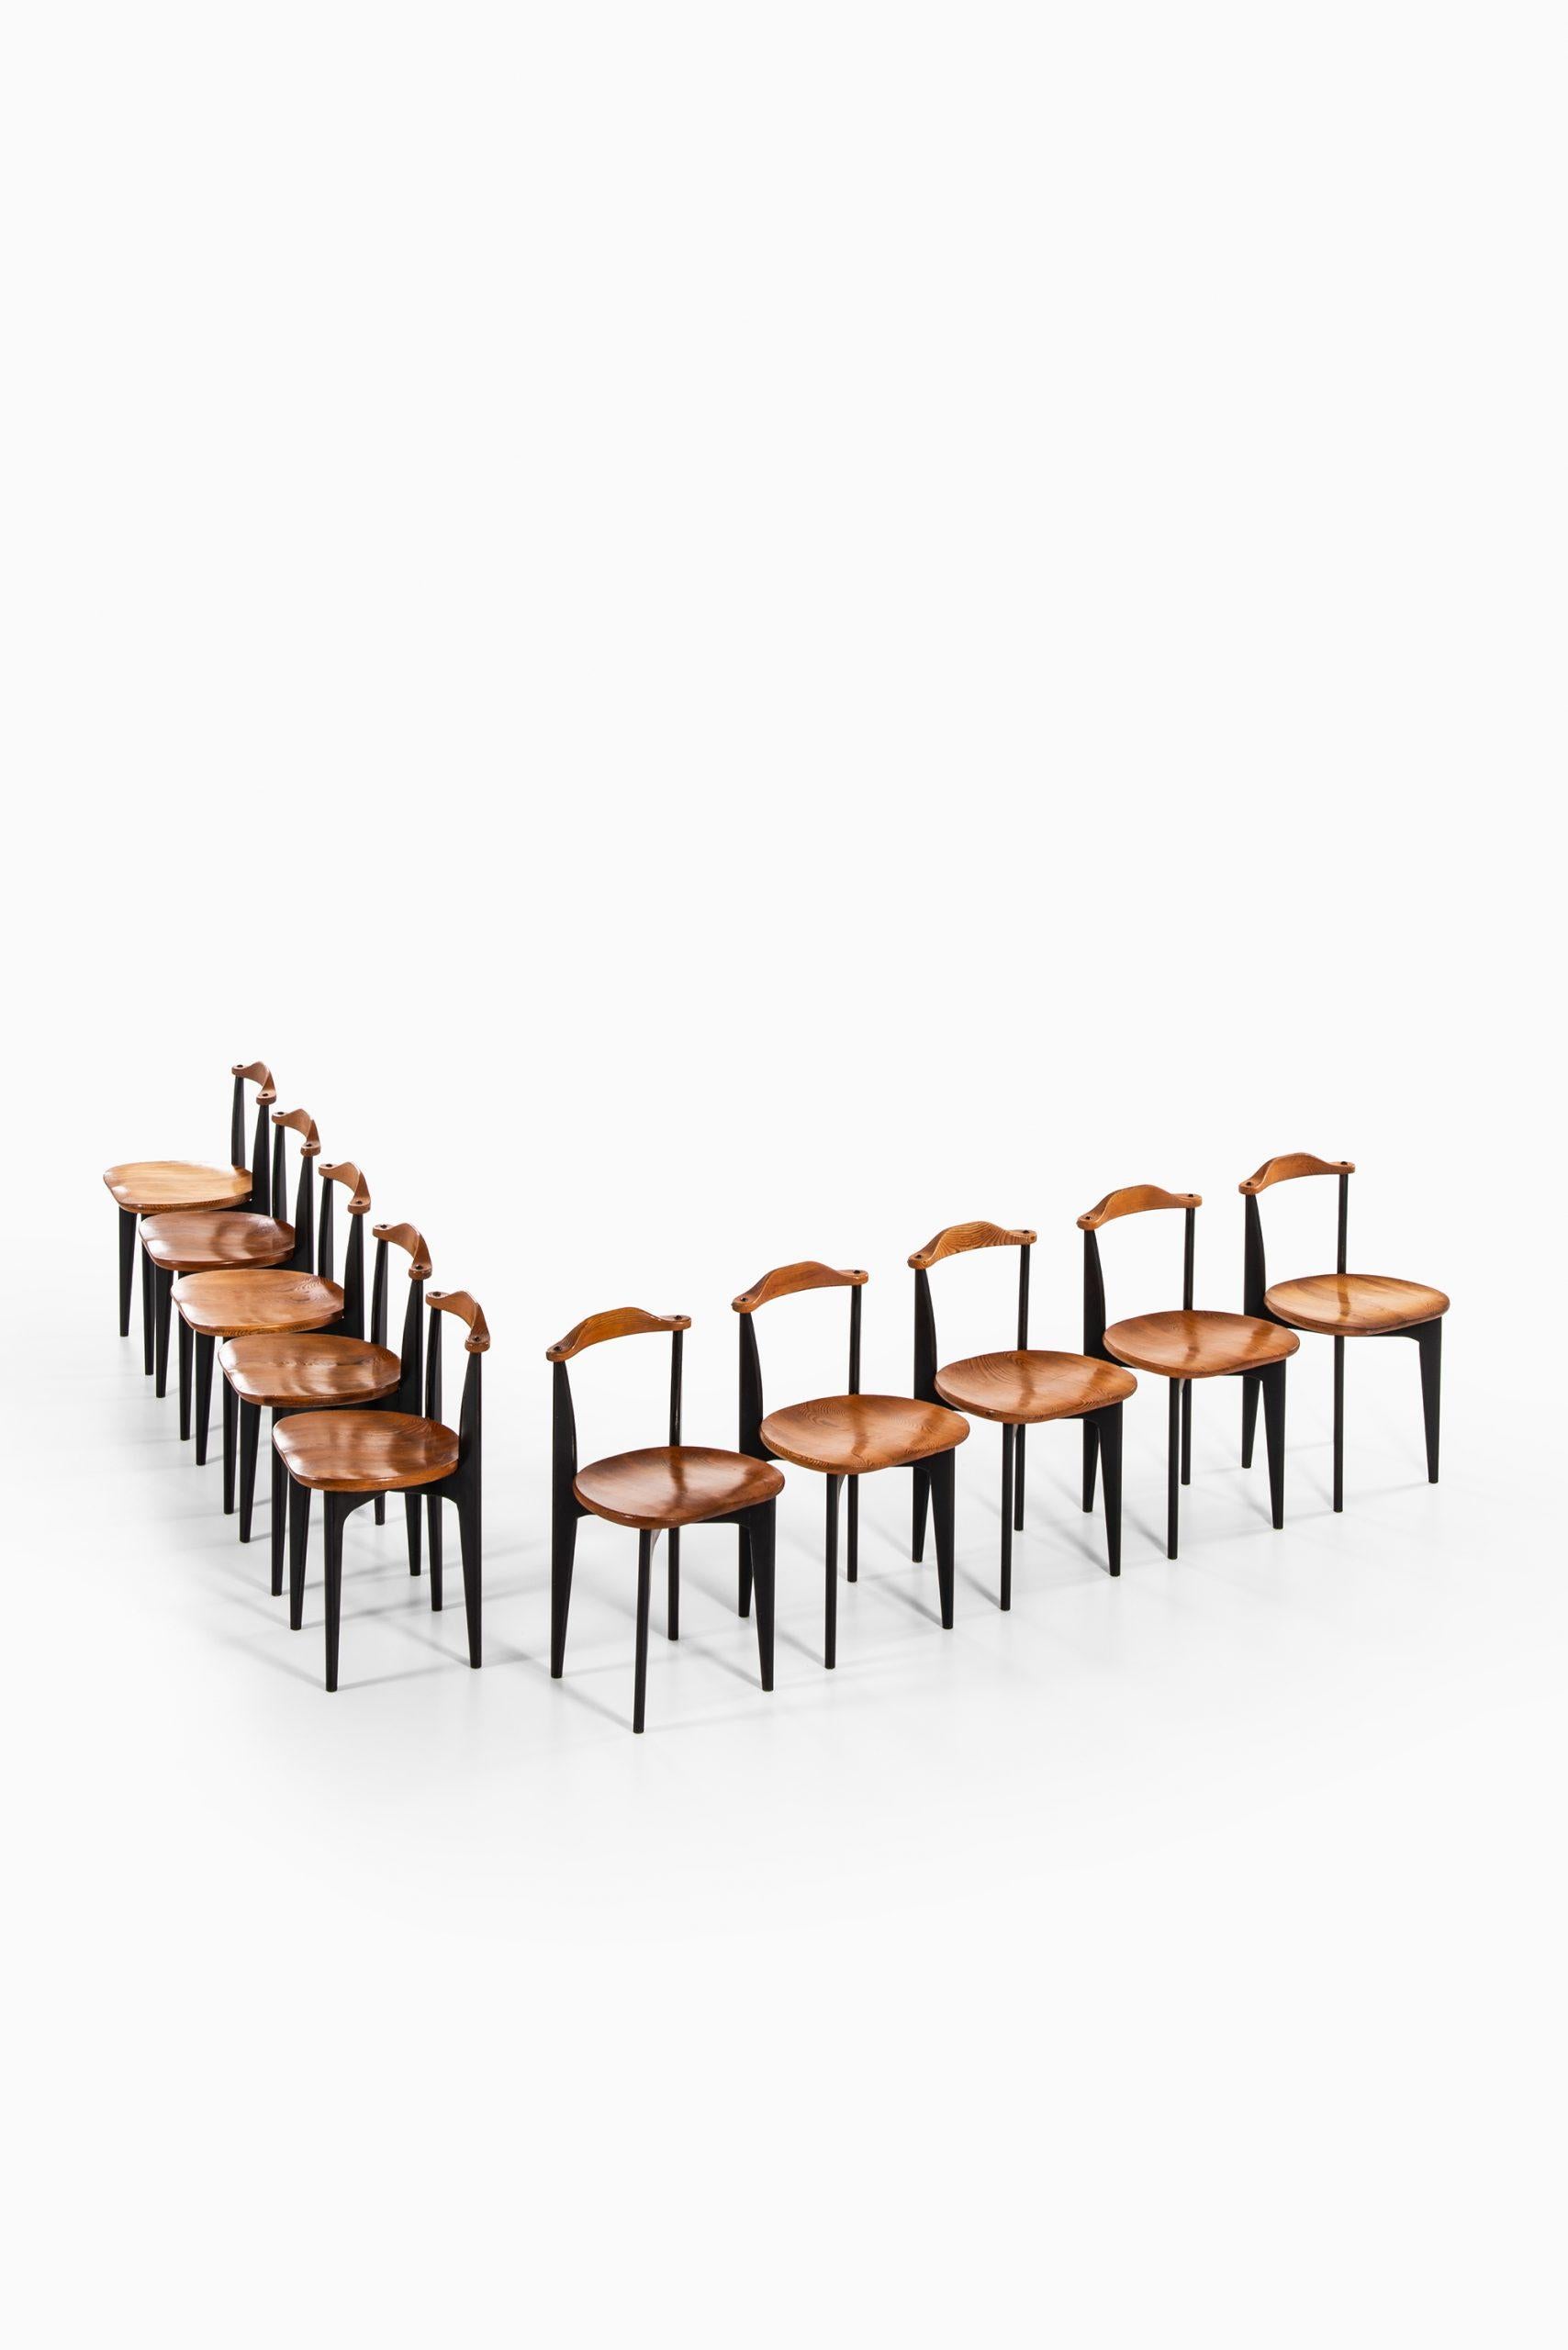 Rare set of 10 dining chairs model Thema designed by Yngve Ekström. Produced by Swedese in Sweden.